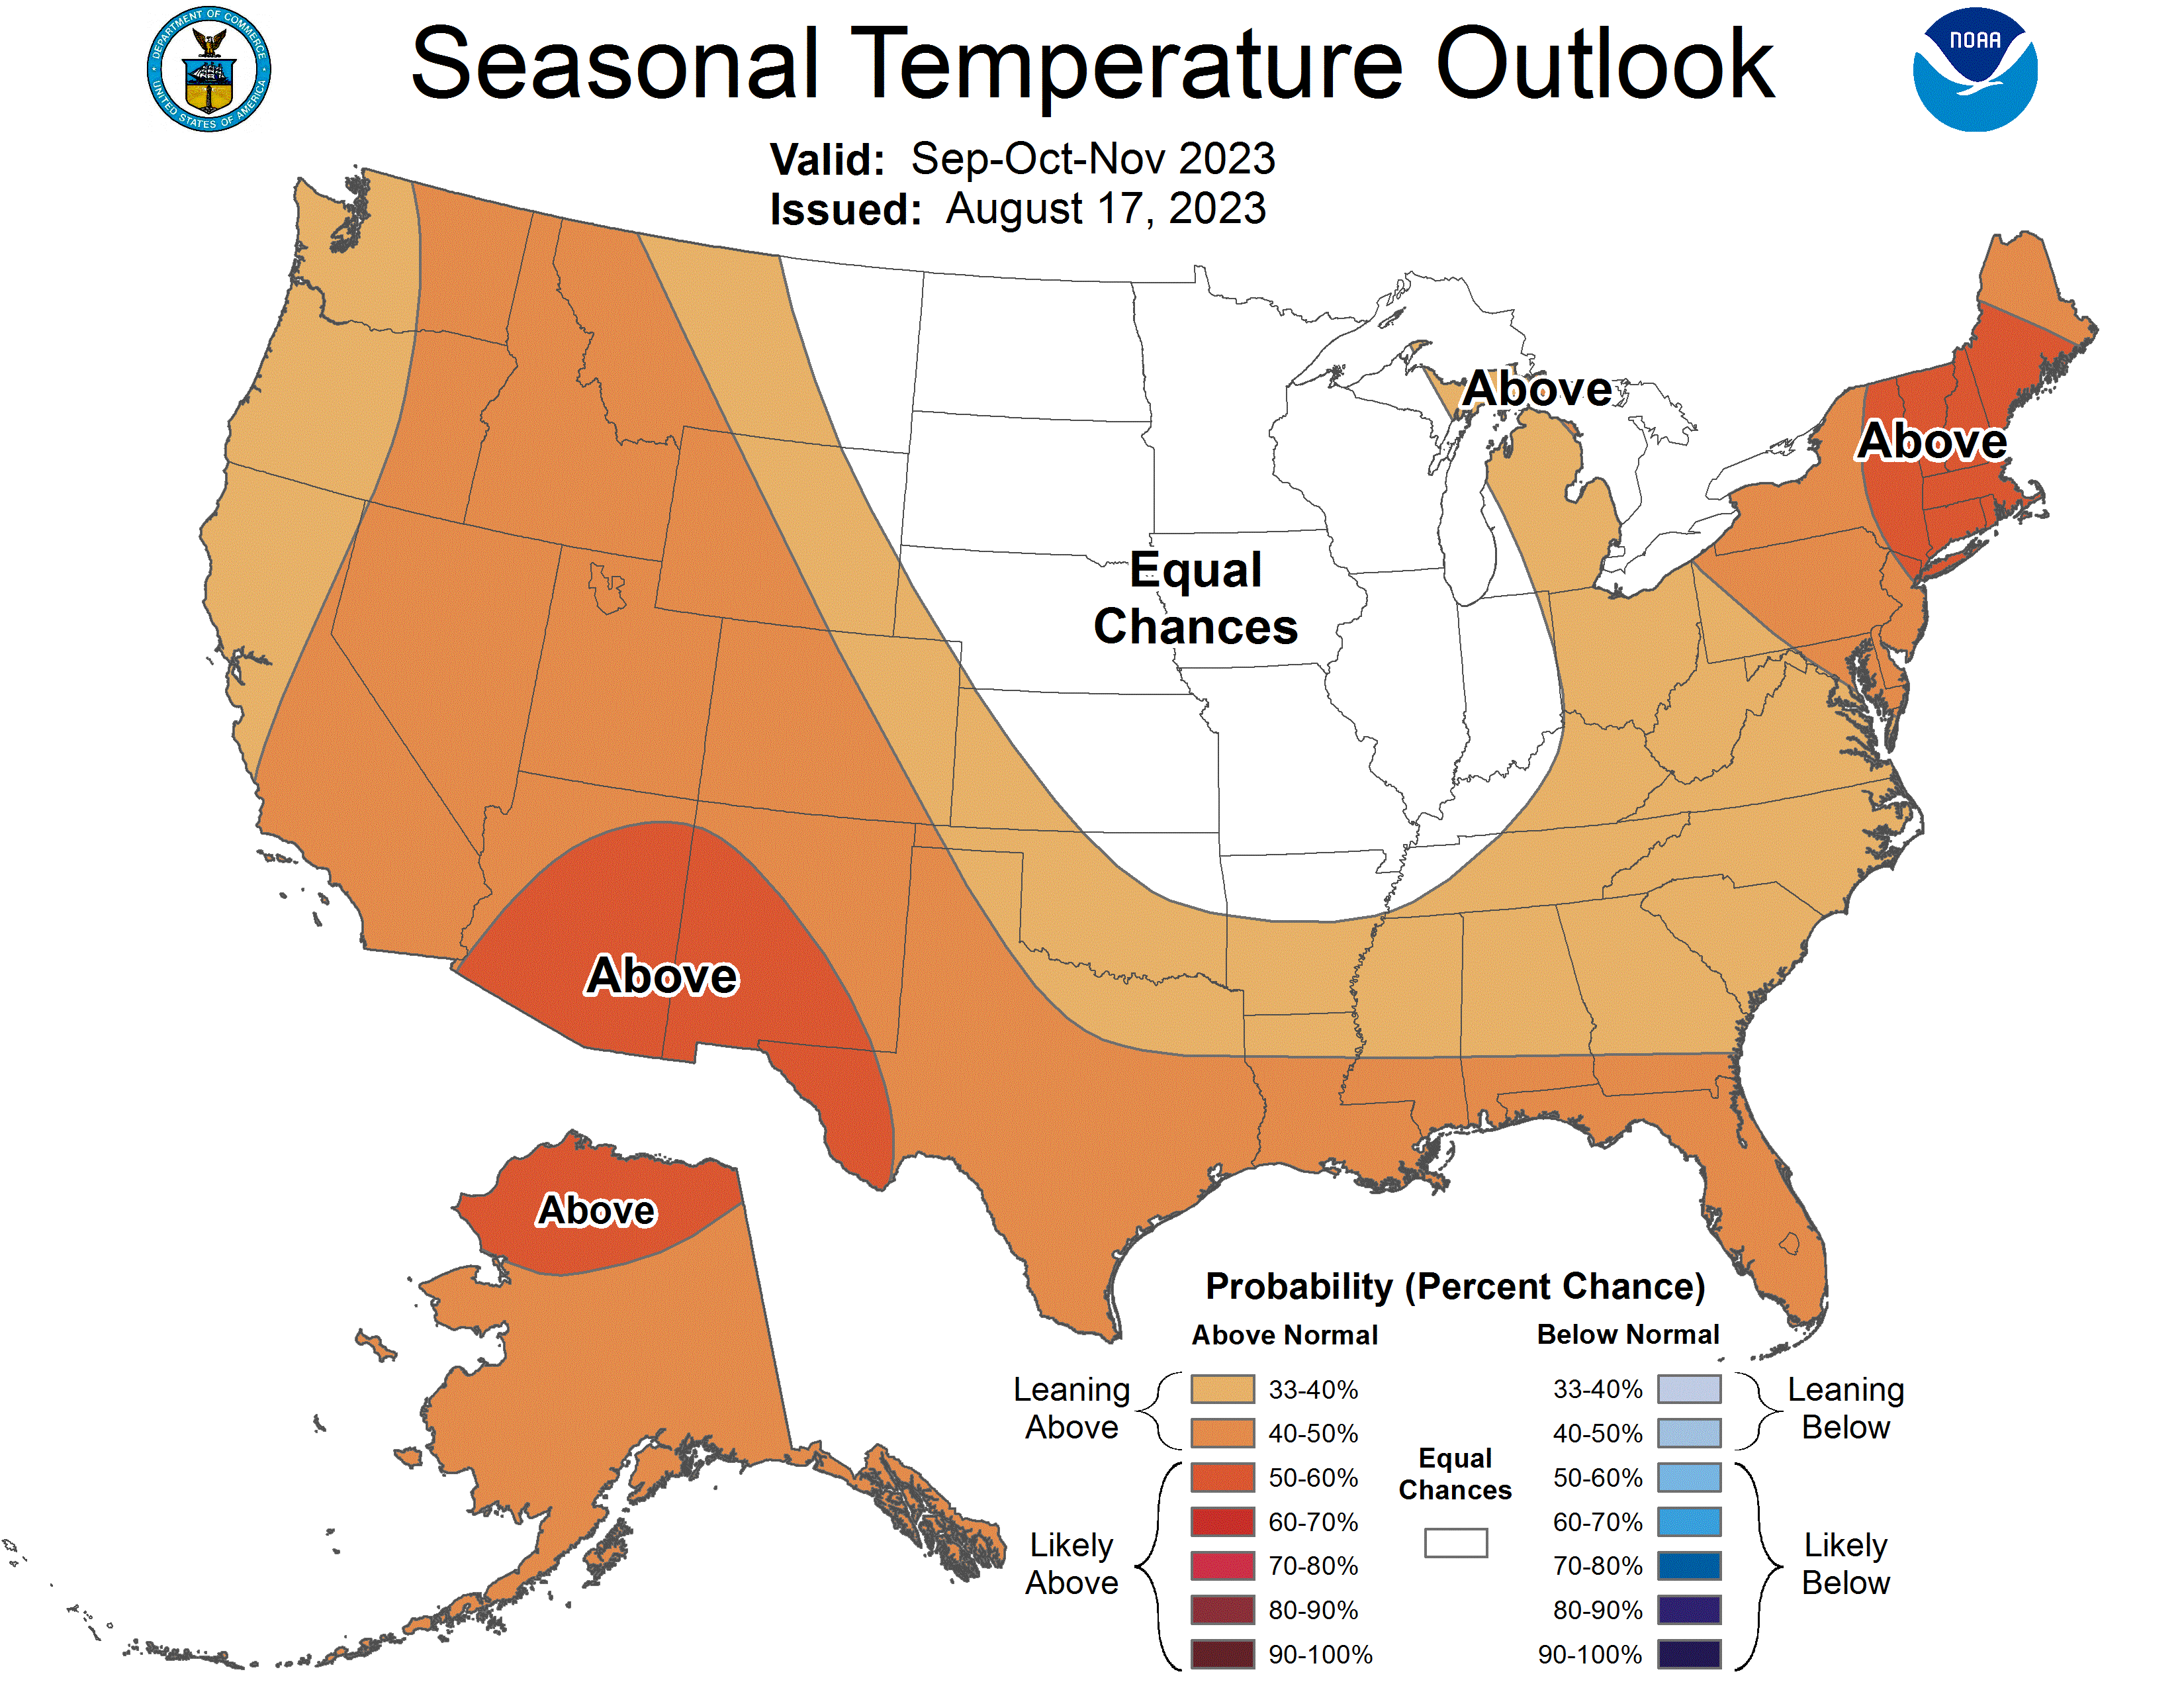 First Preliminary Summer Forecast 2023 